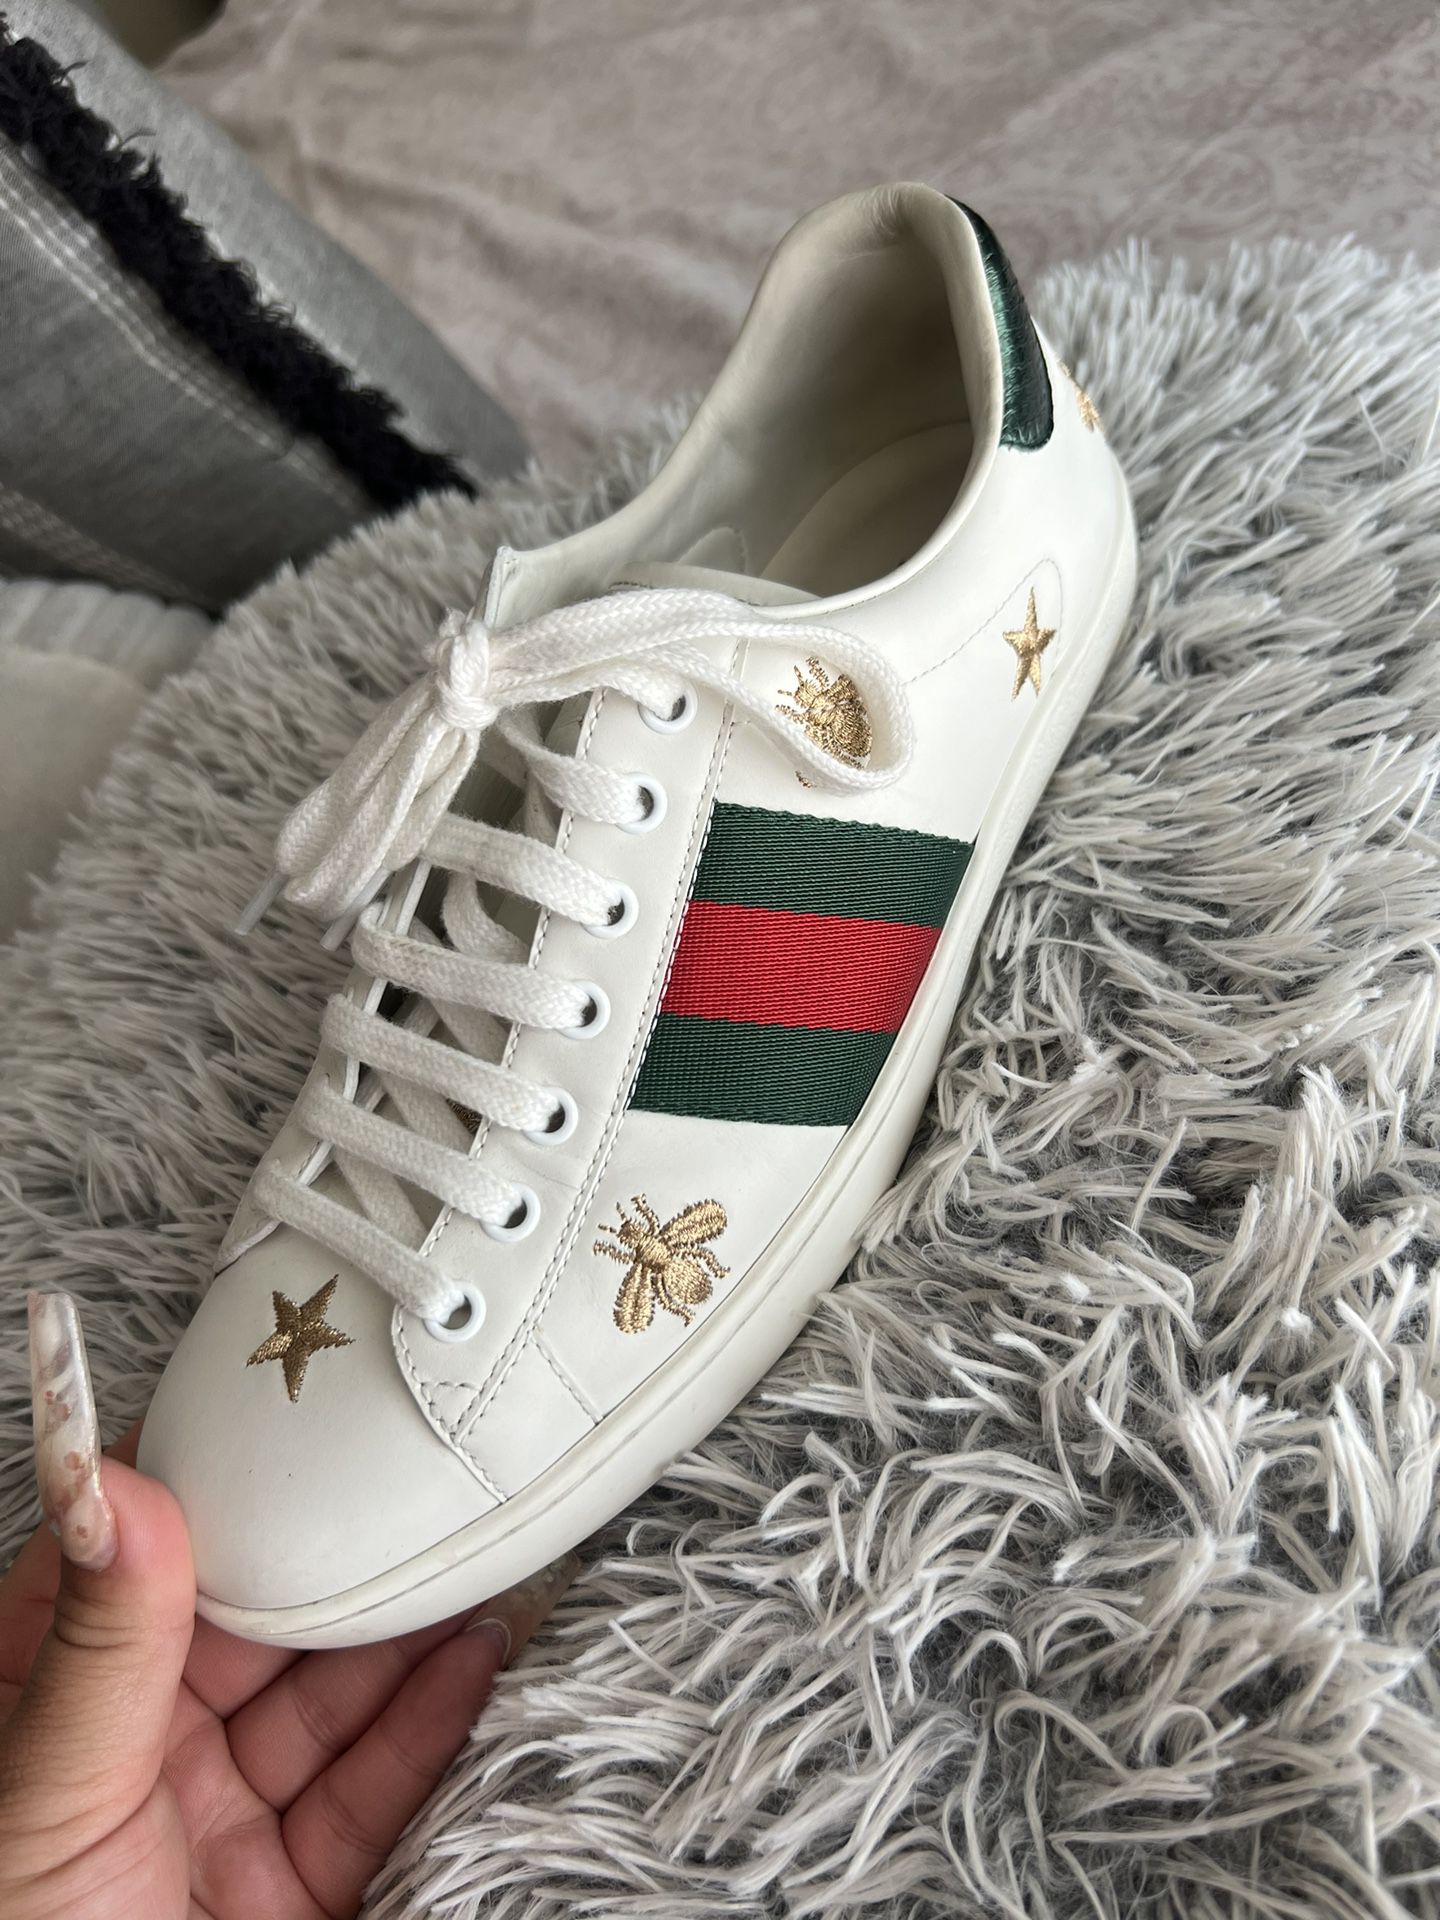 Gucci Authentic Empty Shoe Box for Sale in Mineola, NY - OfferUp